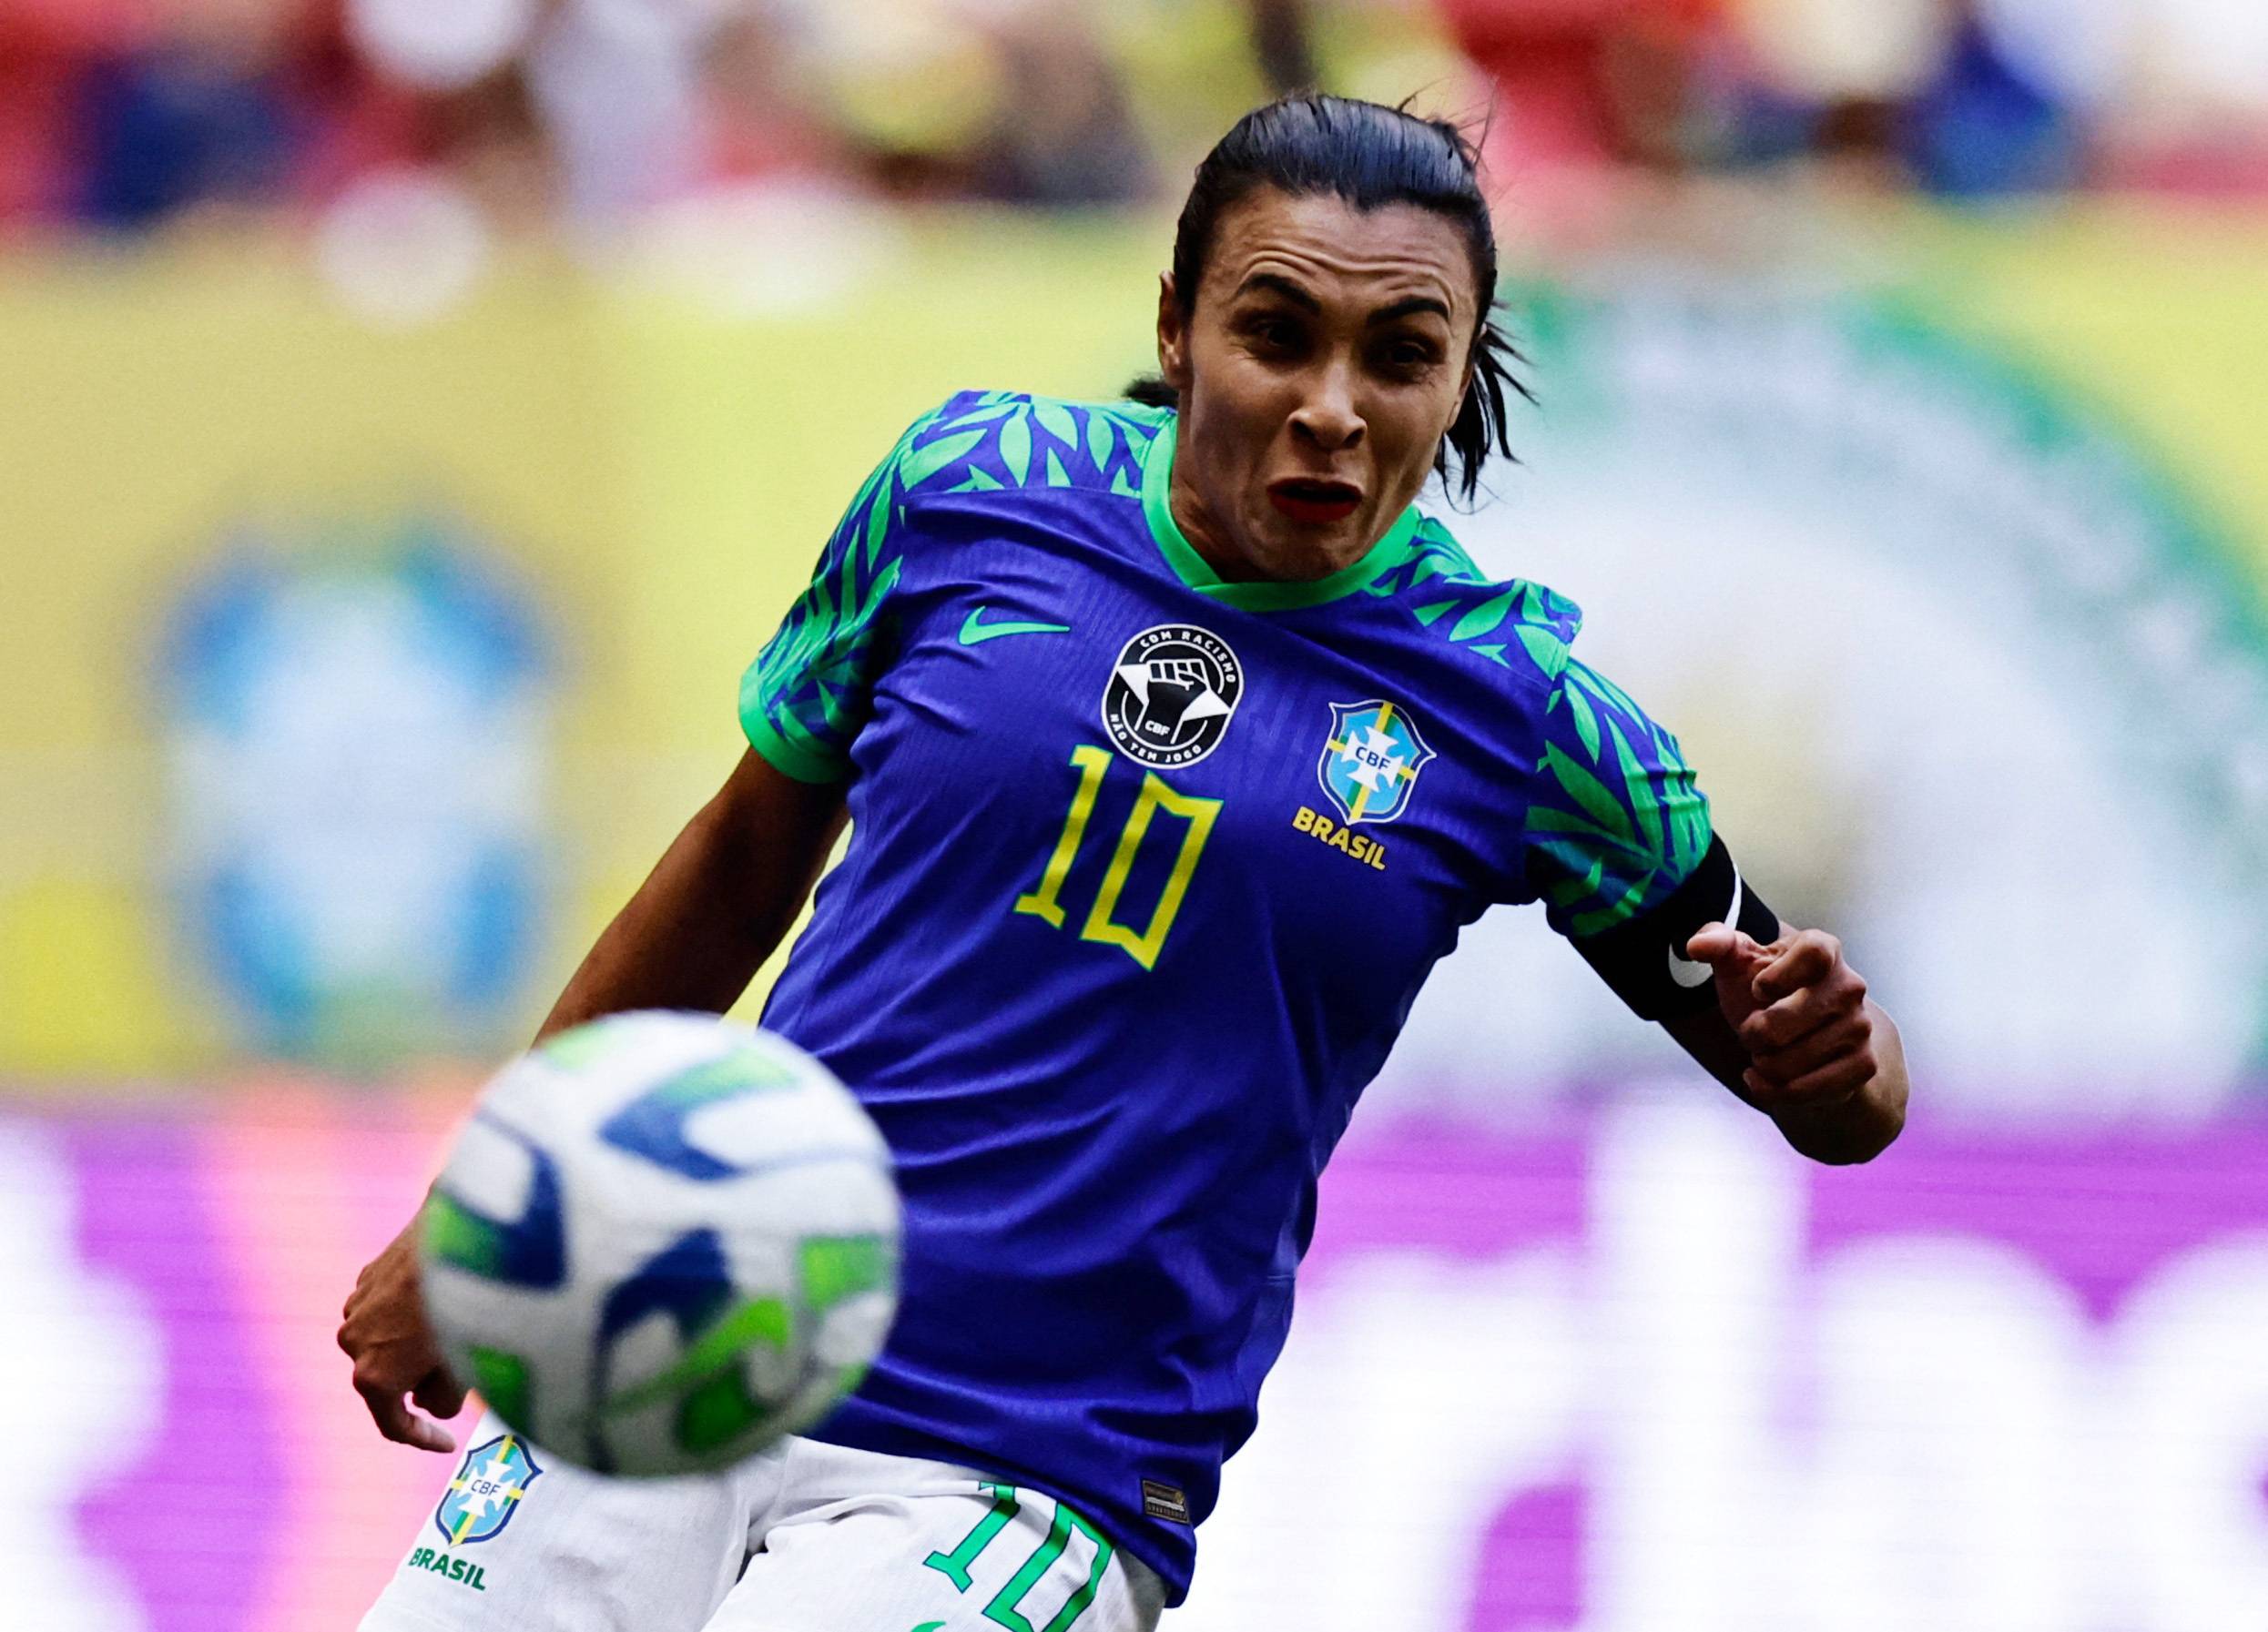 Brazil S Marta Says Sixth Women S World Cup Will Be Her Last The Japan Times